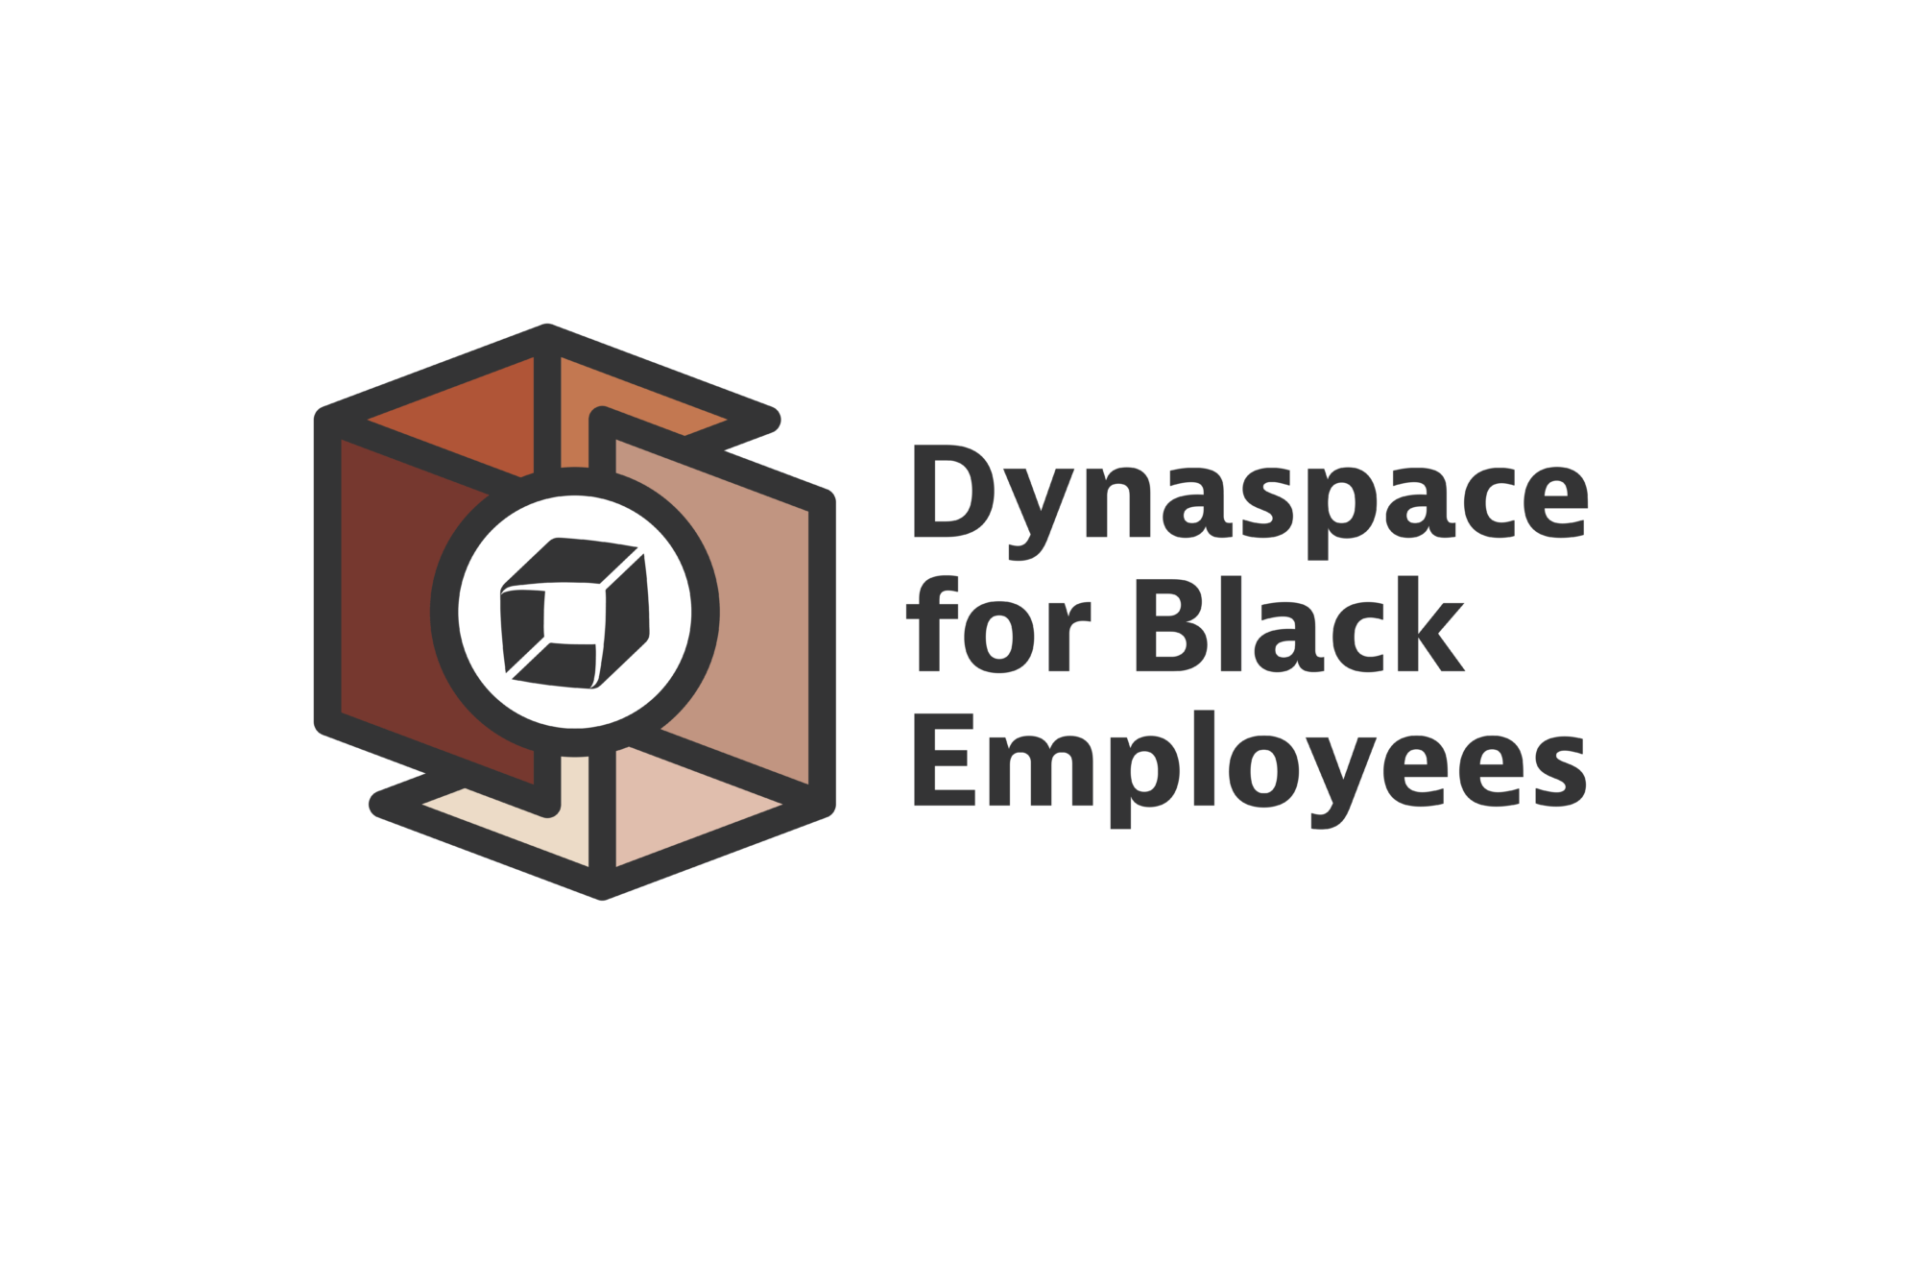 Dynaspace for Black Employees